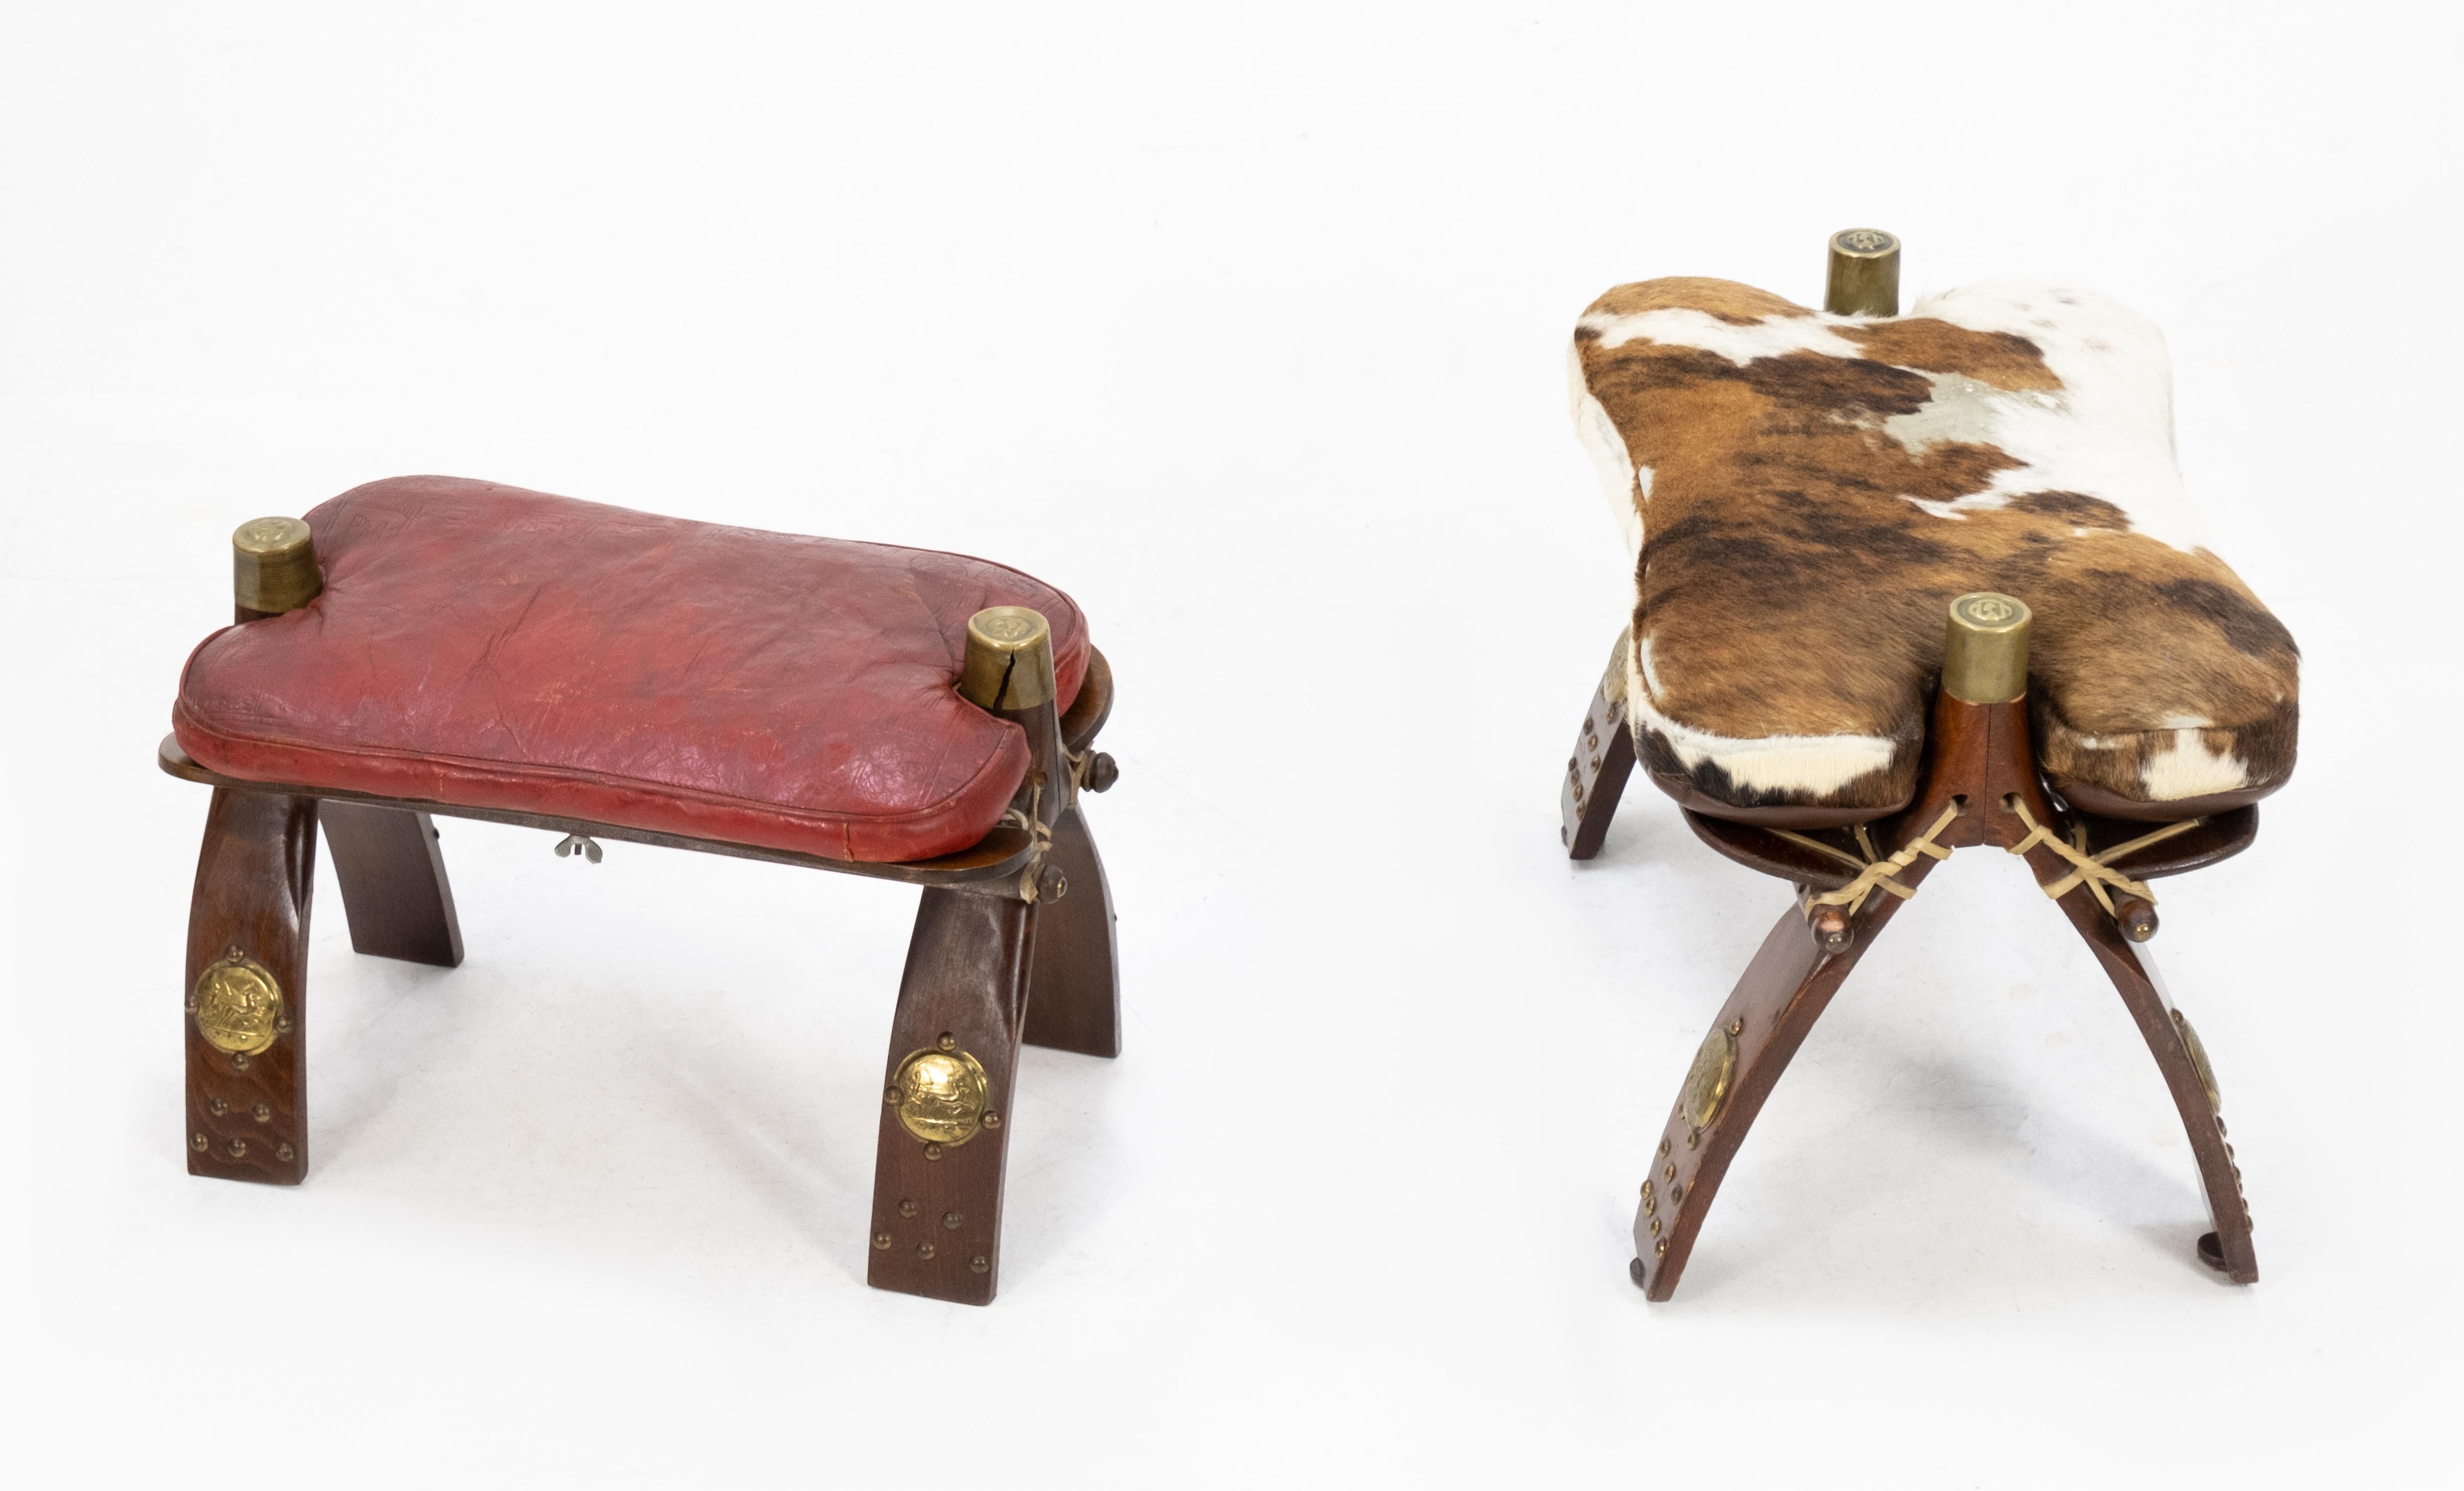 Two camel saddle foot stools from Egypt where bring back by the tourists in the 1960s. Love these little stools. One in red leather the other comes with a cowhide. In a used condition. So decorative.
And useful.